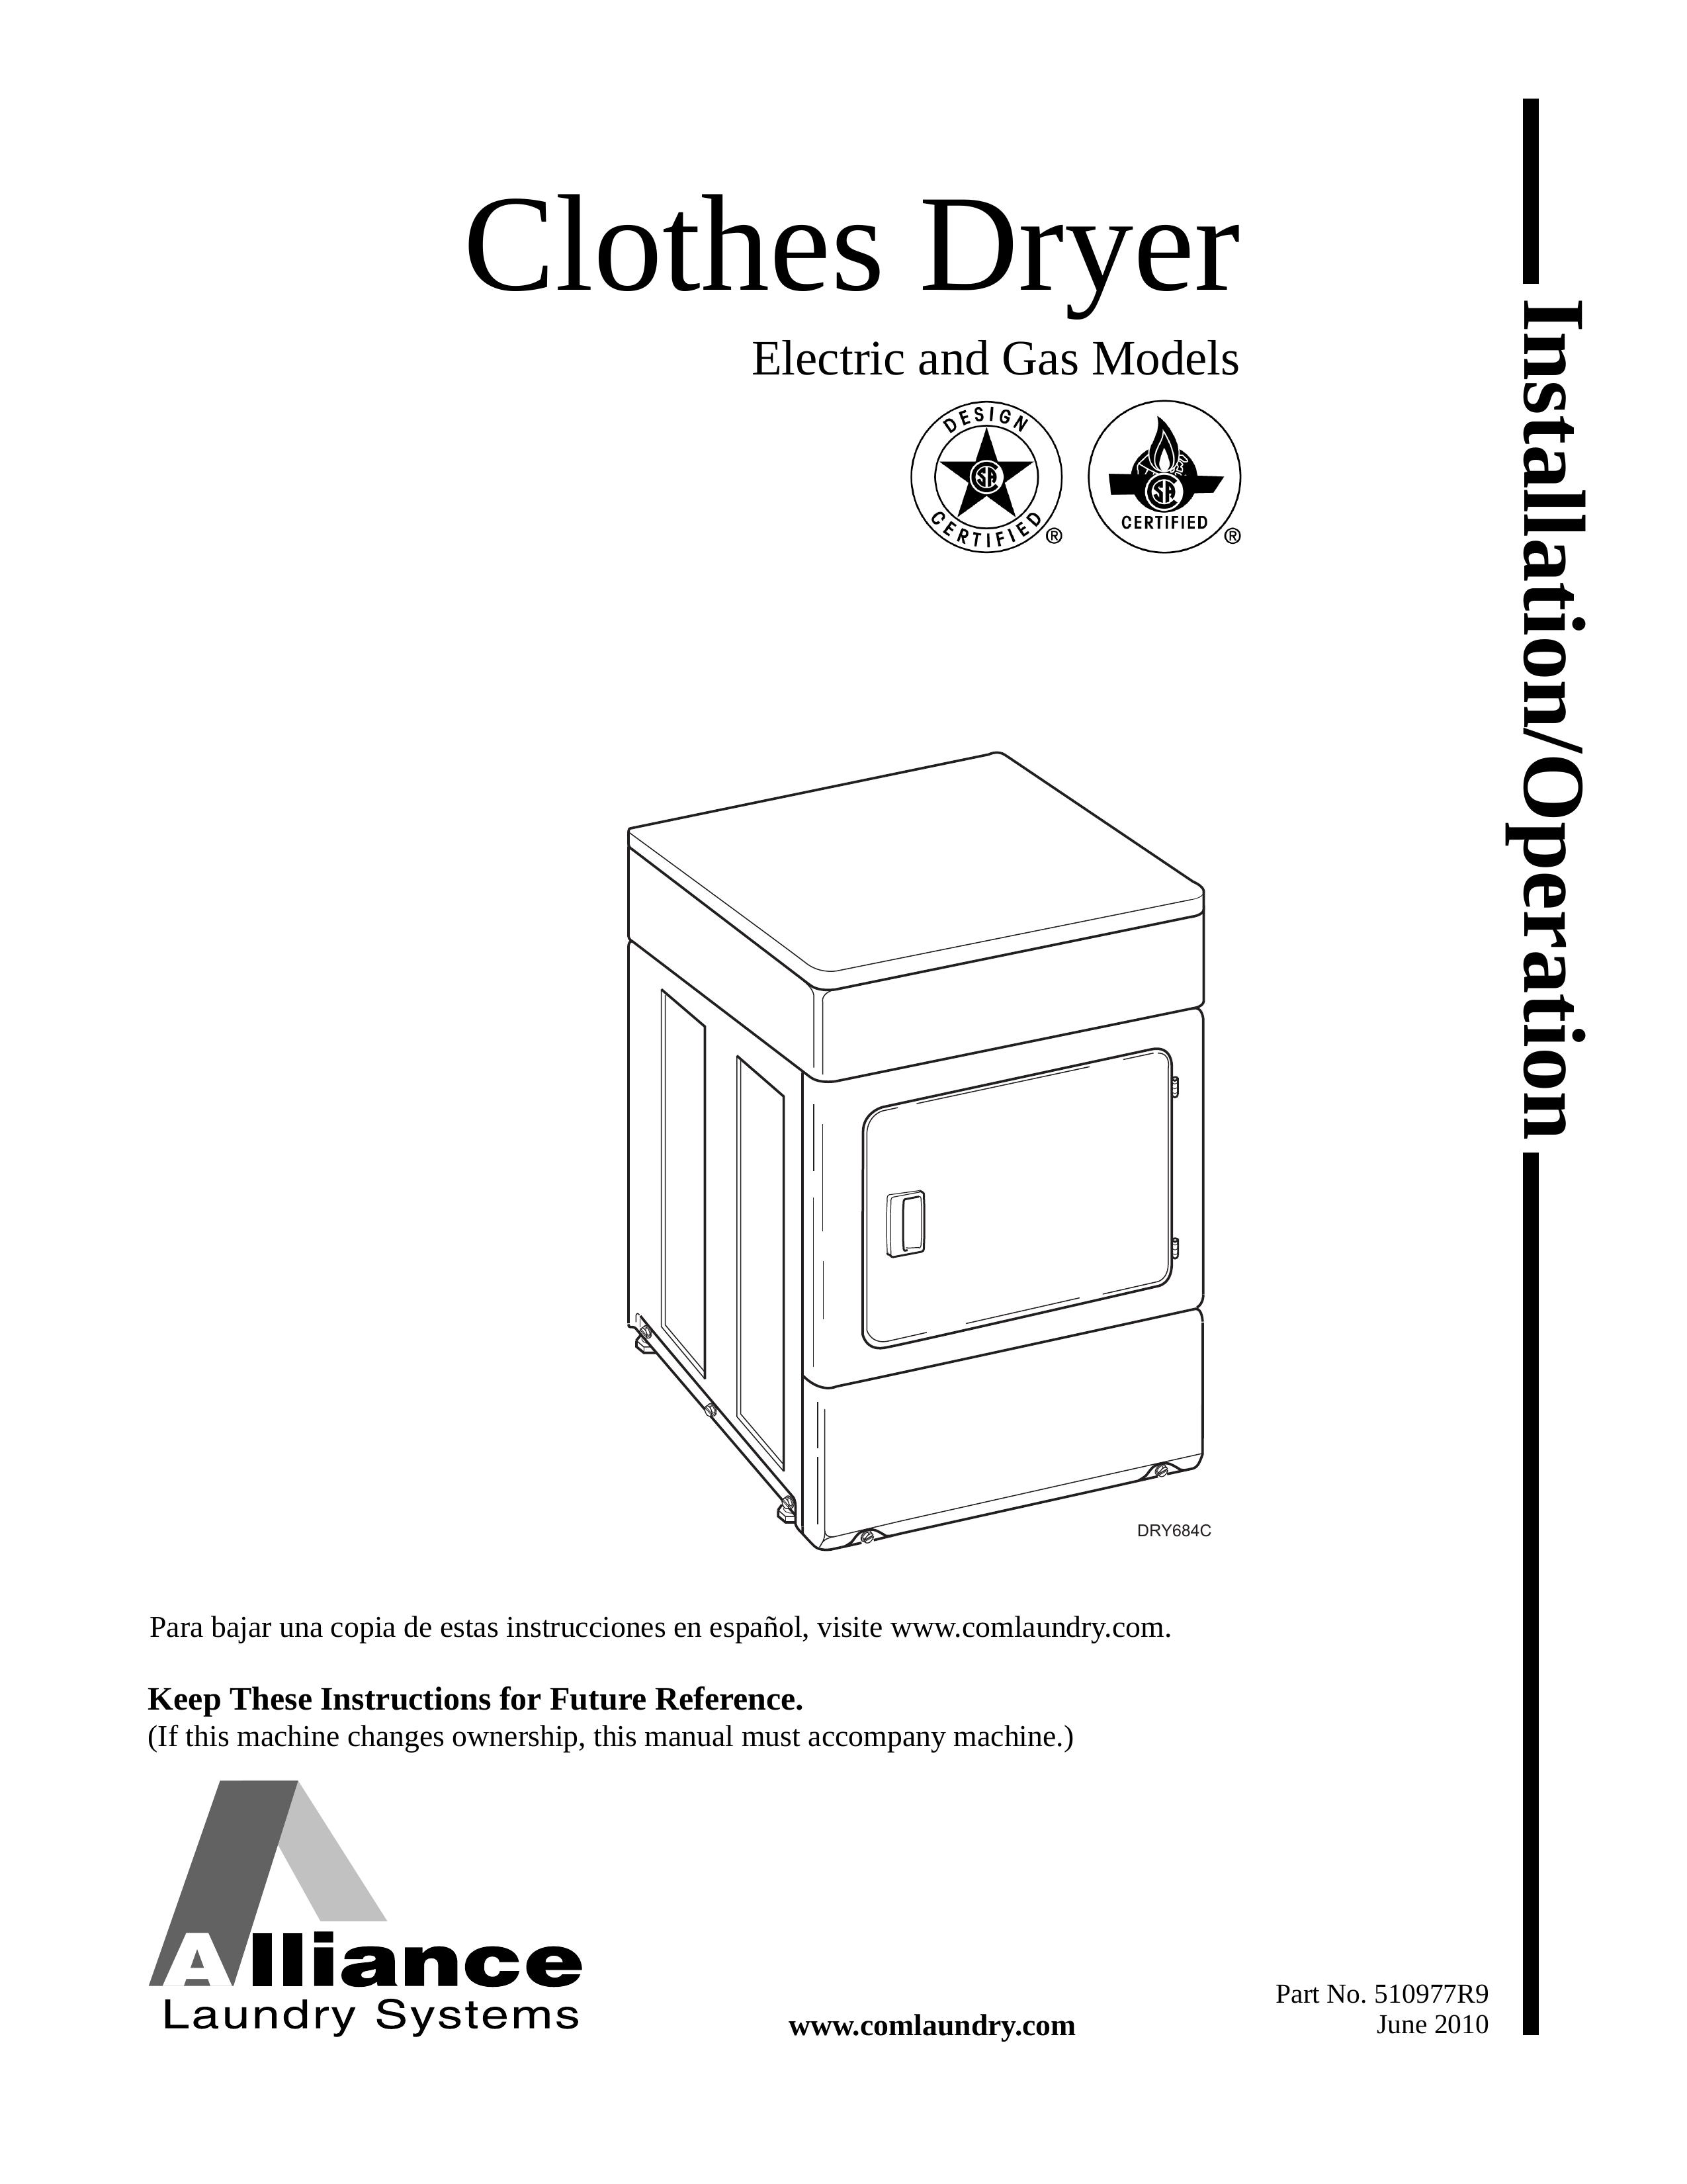 Alliance Laundry Systems DRY684C Clothes Dryer User Manual